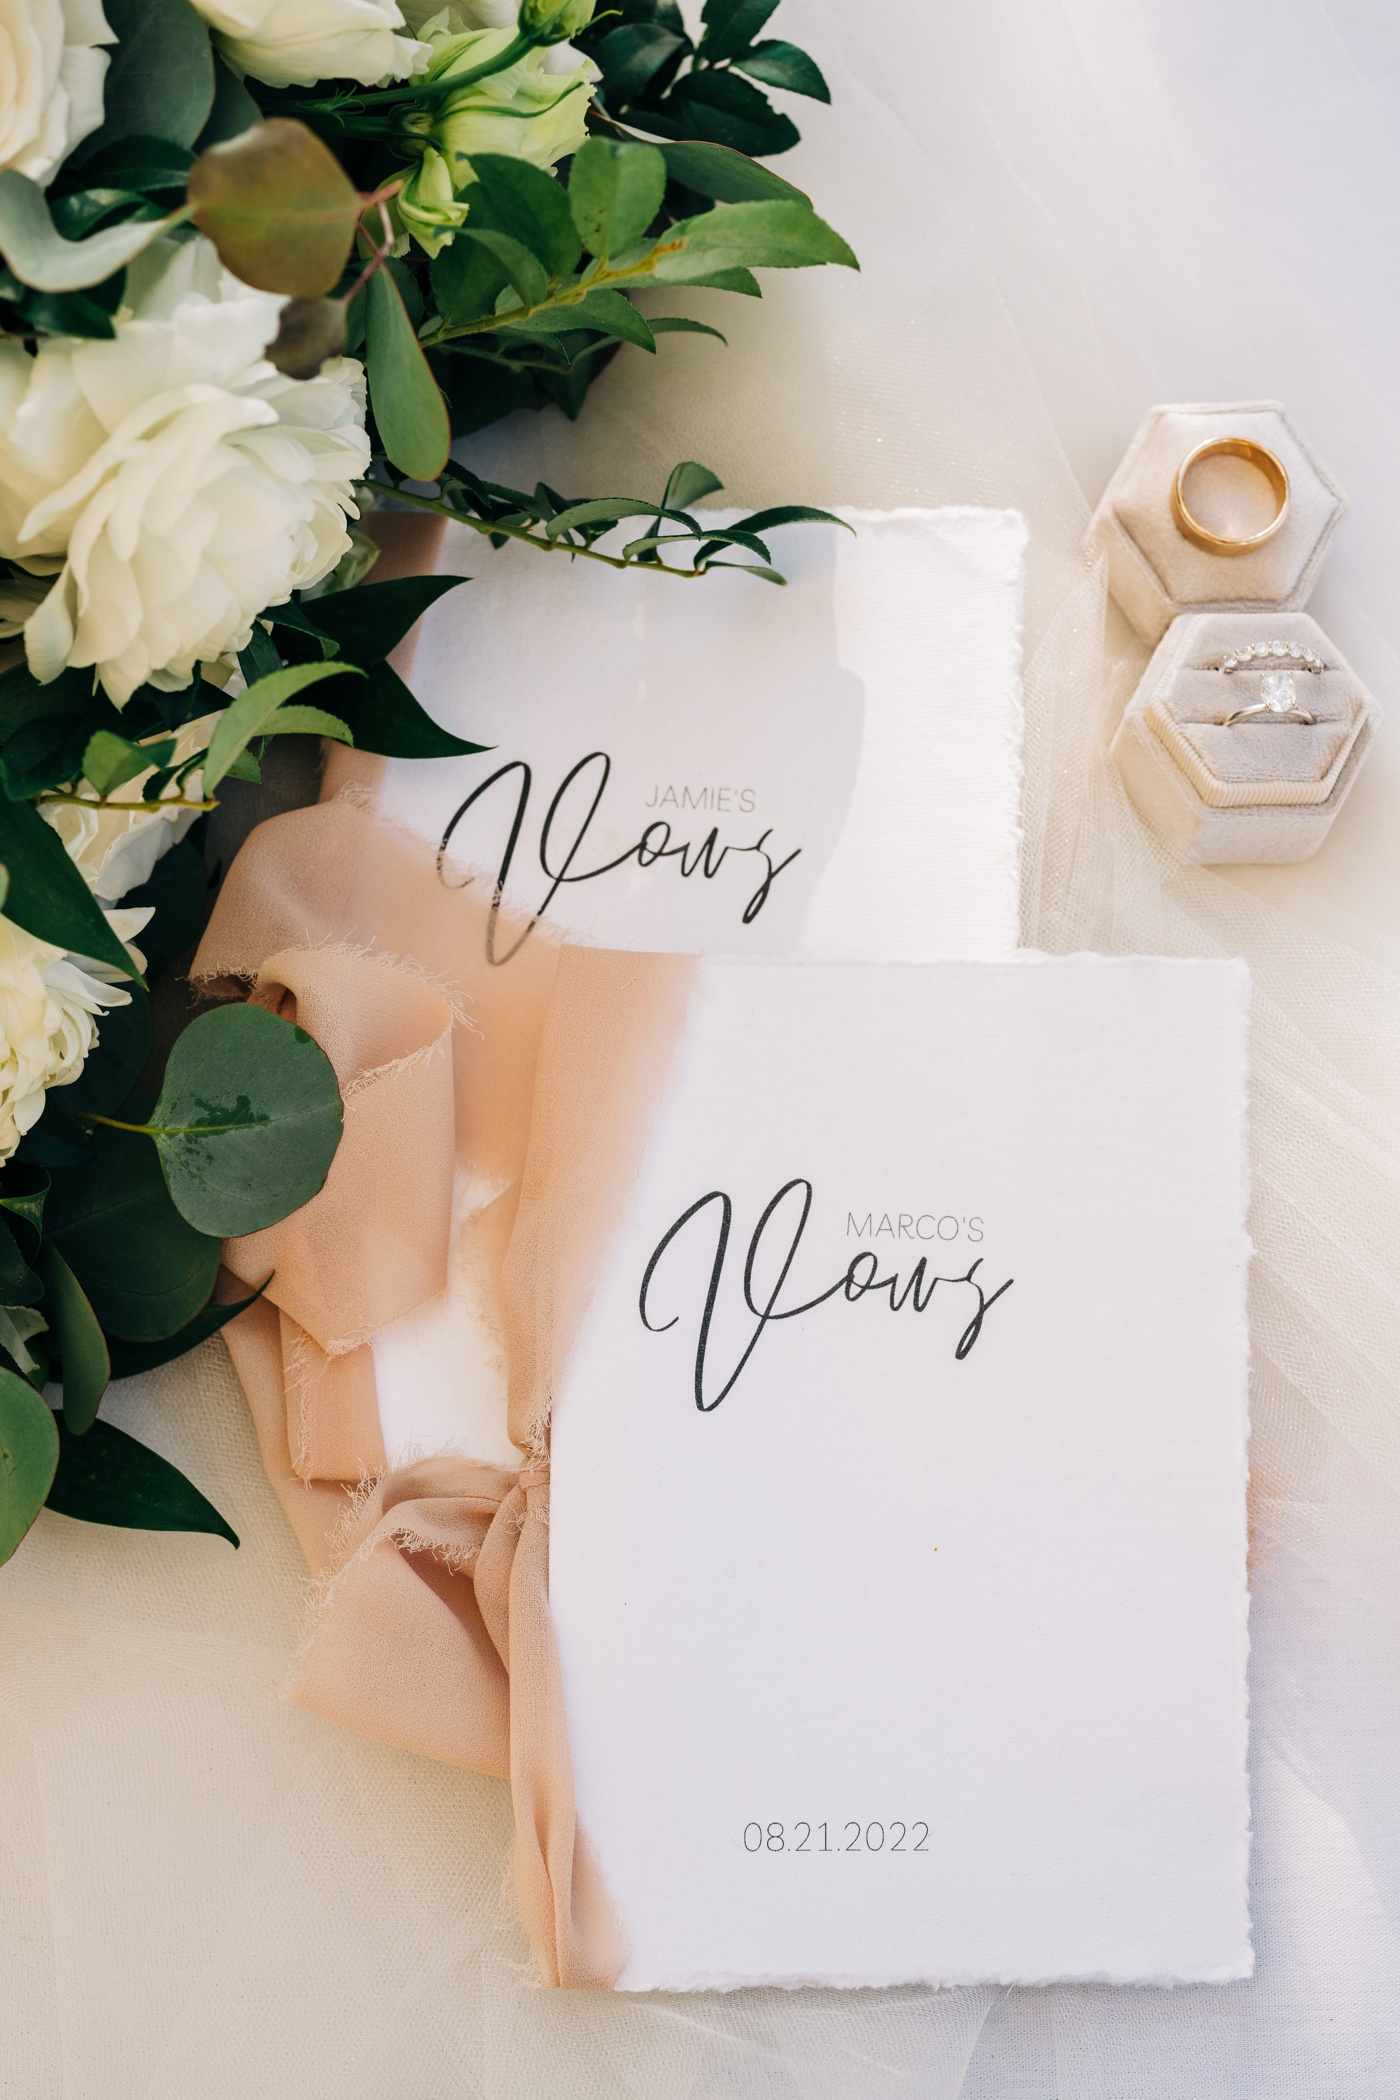 Why wedding day details are important